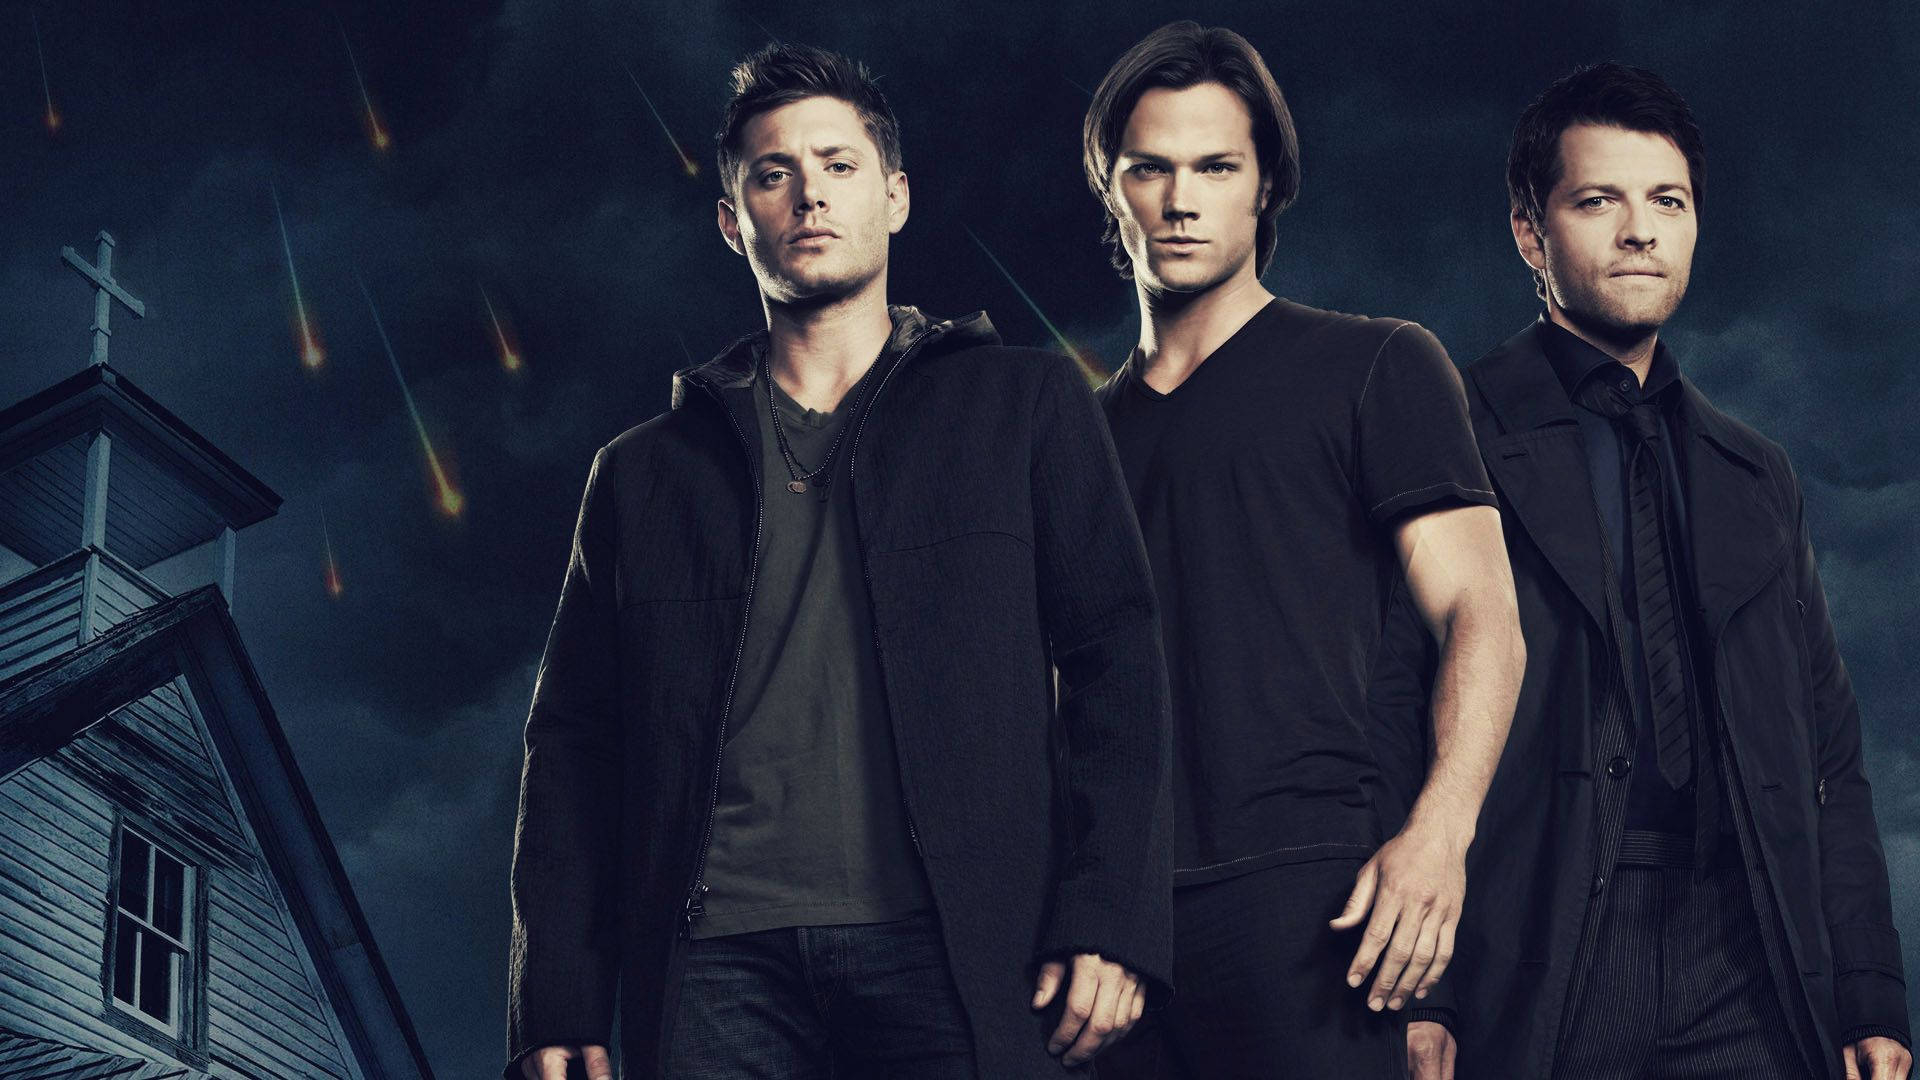 Supernatural 1920X1080 Wallpaper and Background Image